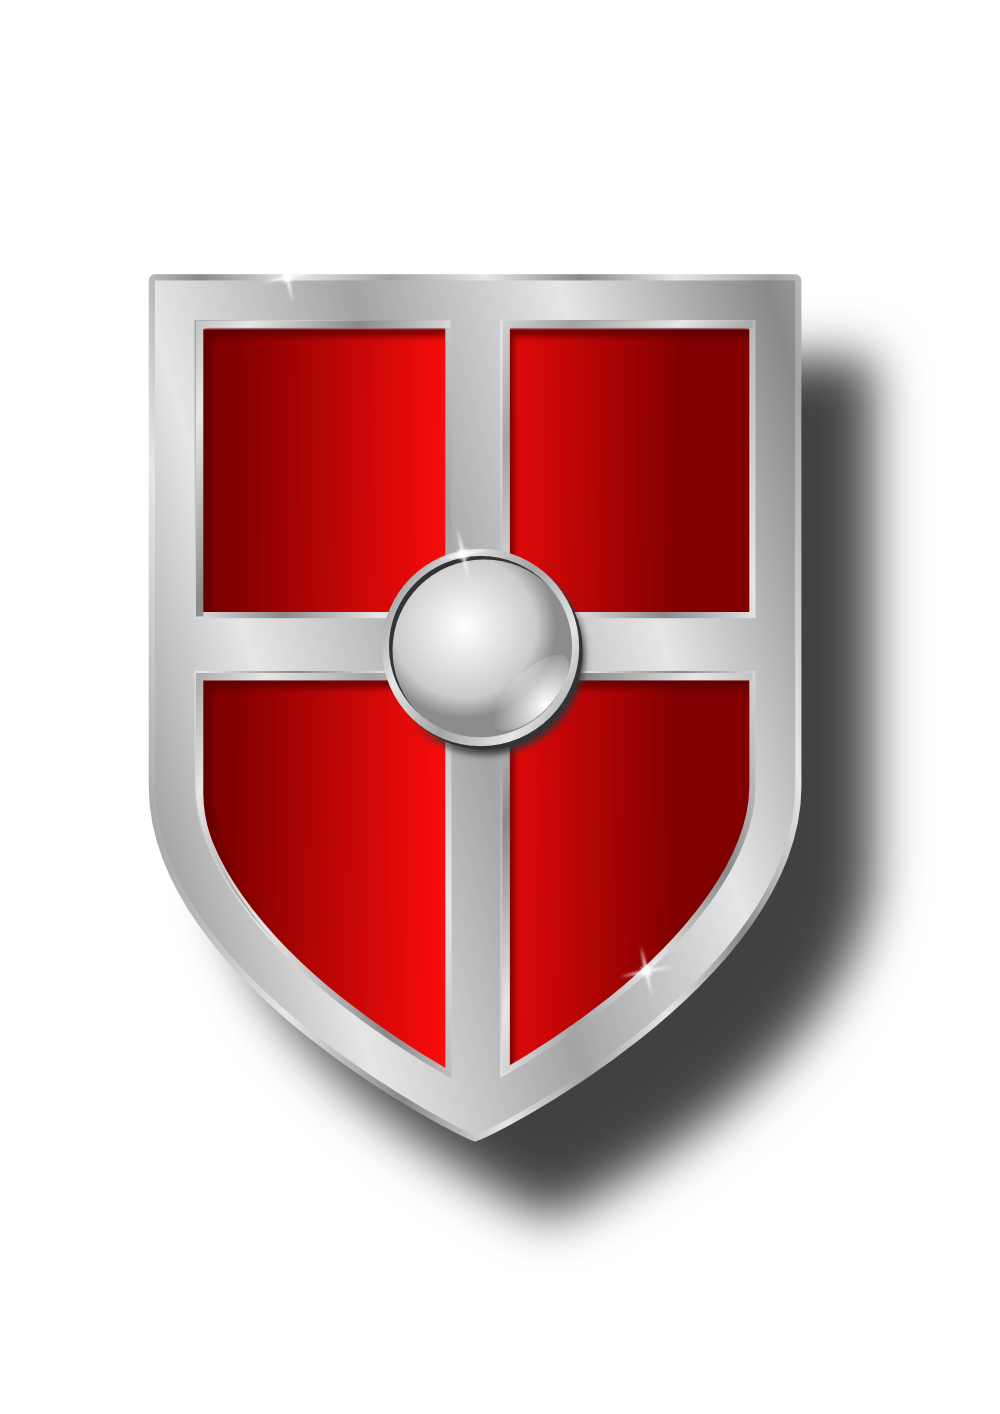 Knightly shield clipart - Clipground